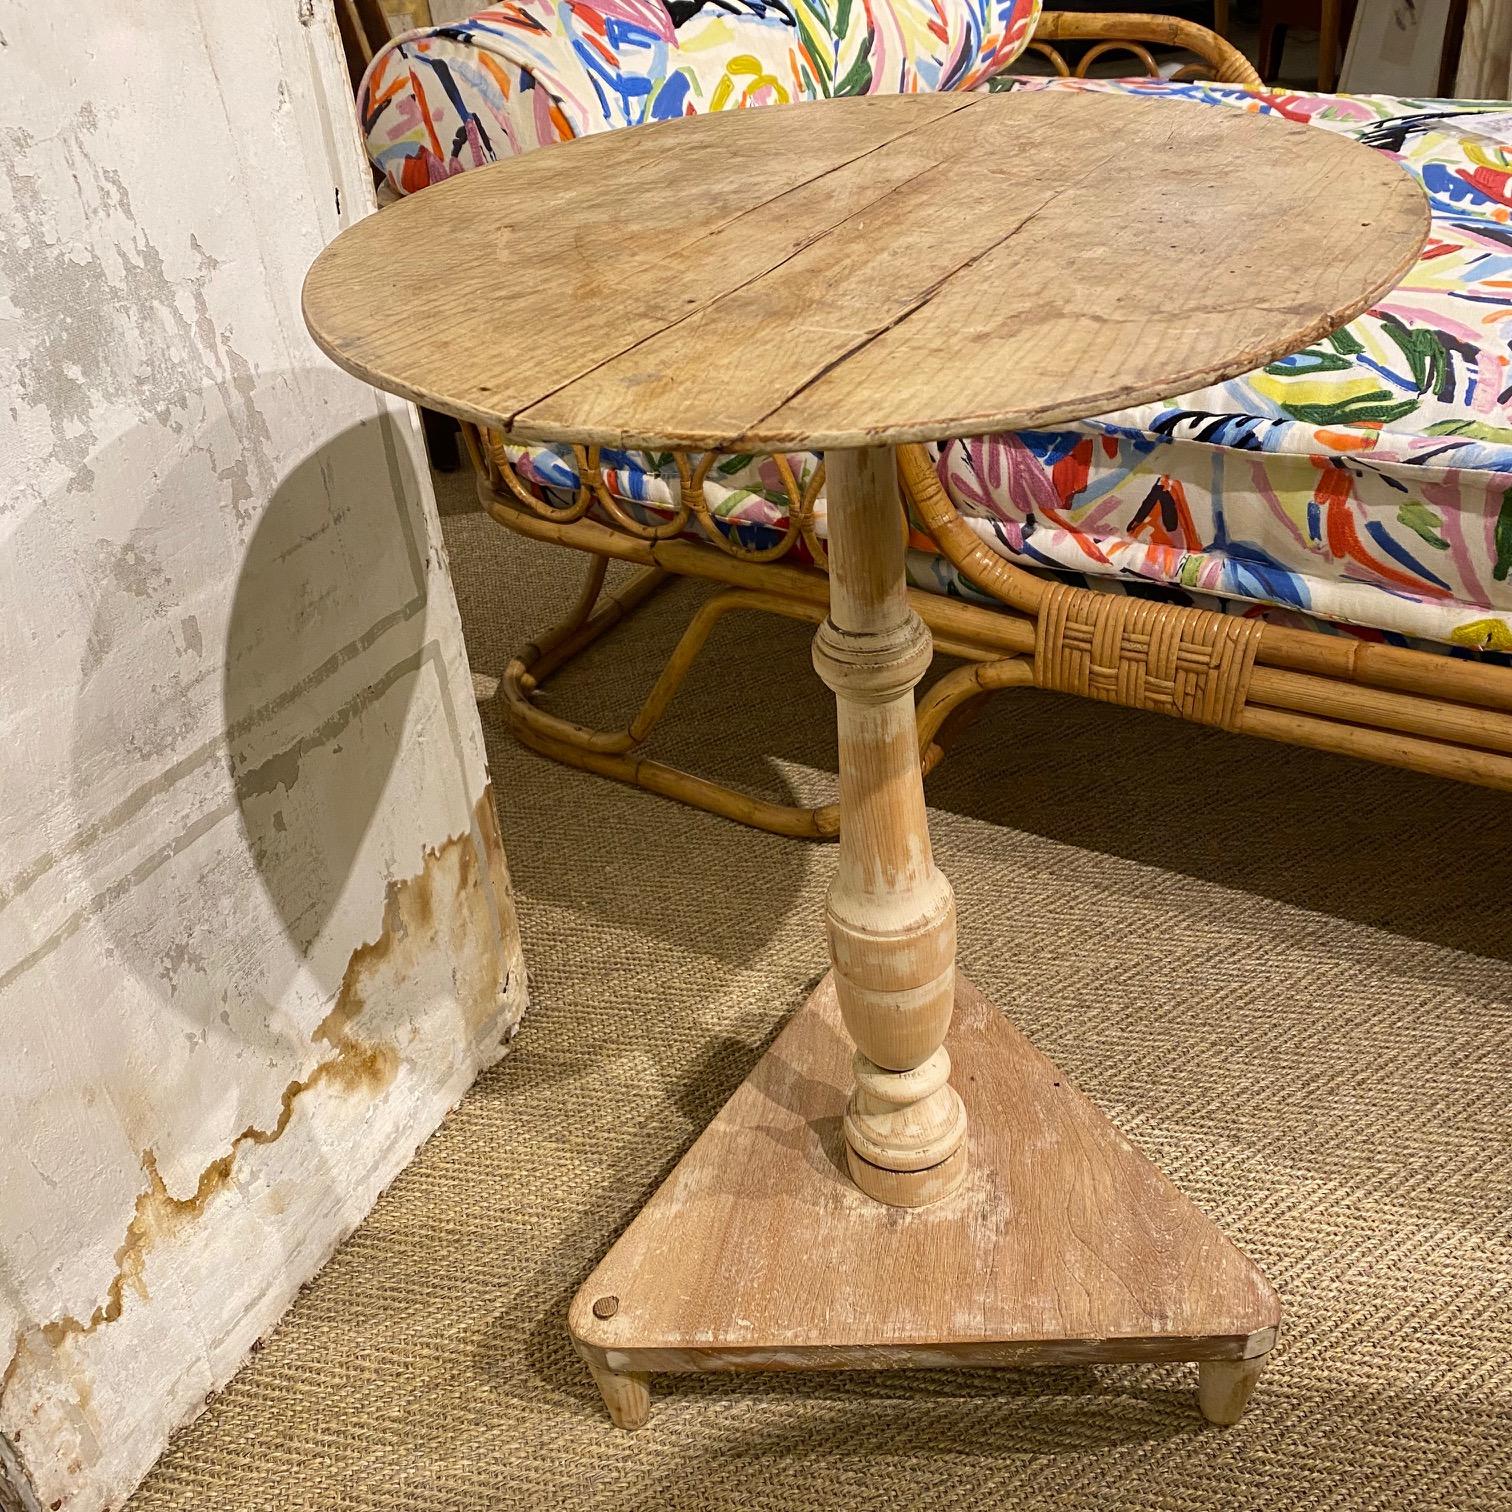 Pine pedestal candle table, late 18th-early 19th century, American.
Measures: 18